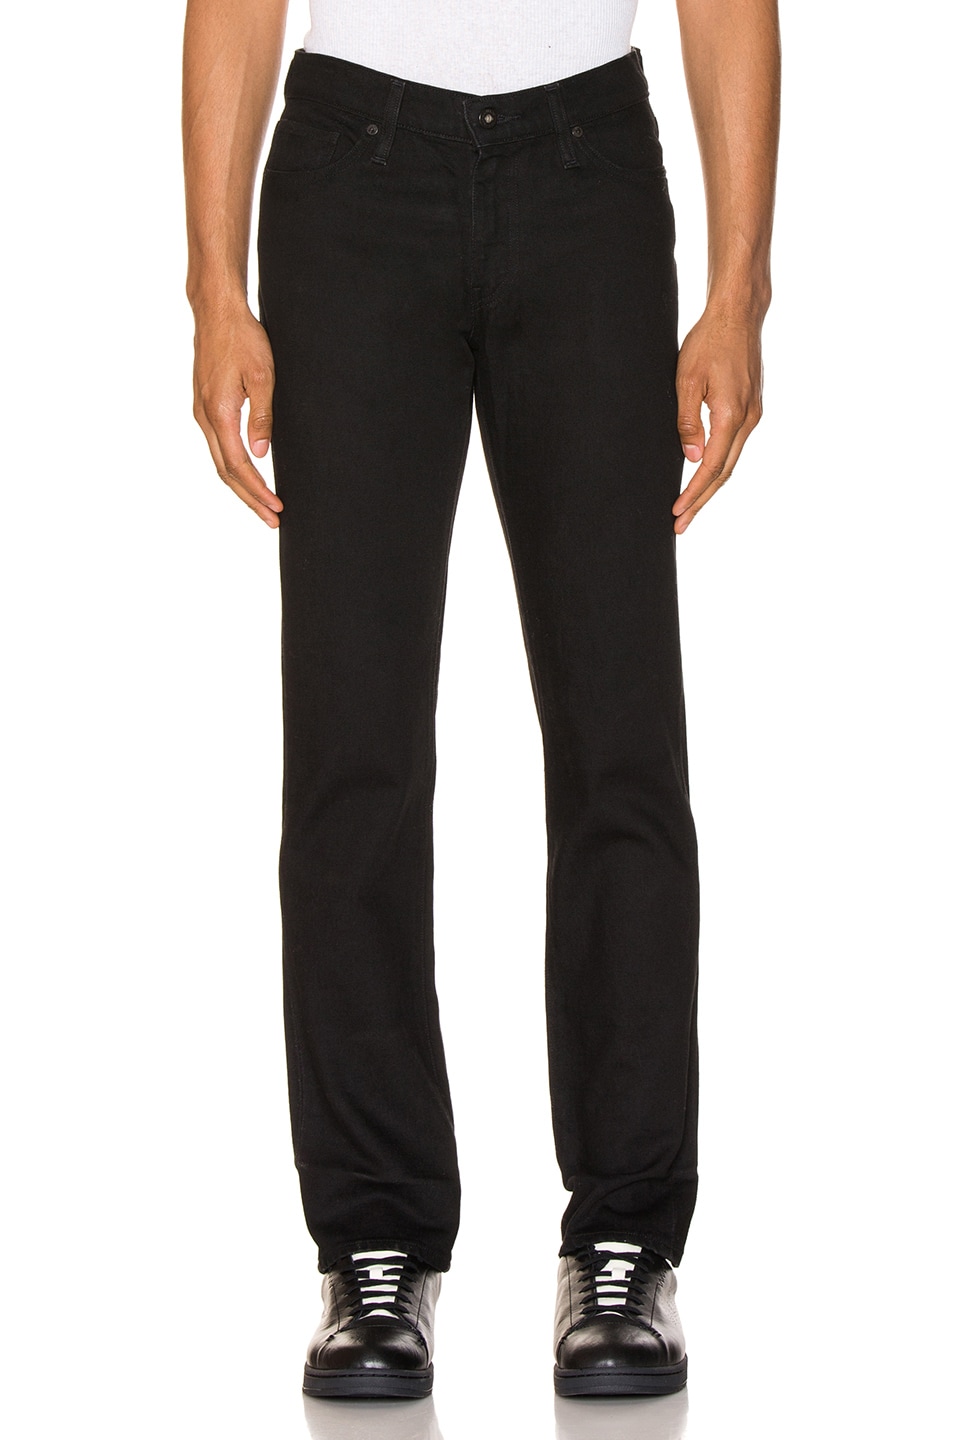 Image 1 of LEVI'S: Made & Crafted 511 in Black Rinse 1 Selvedge